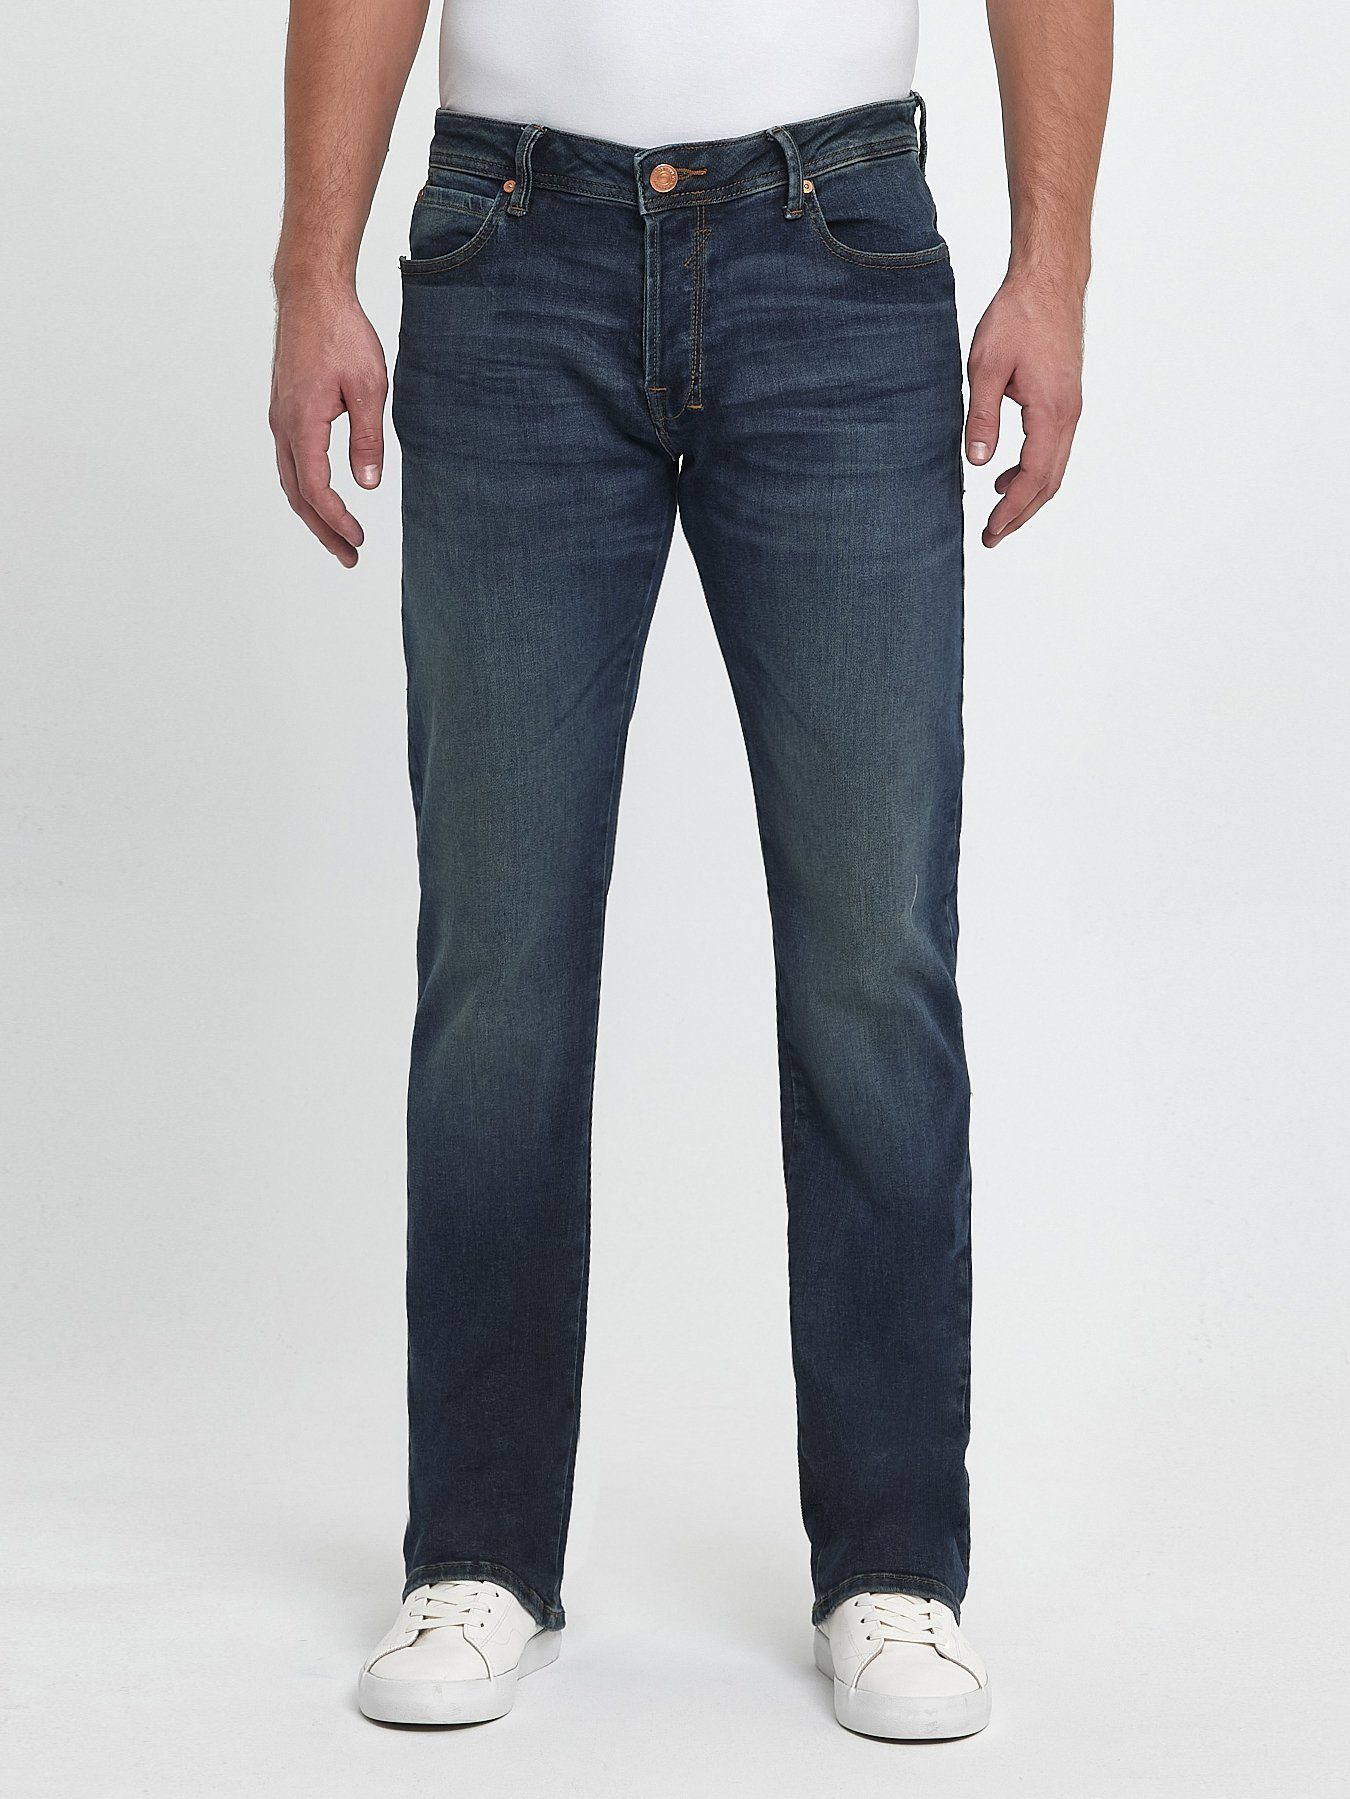 Roden LTB Lane LTB Bootcut-Jeans Wash Jeans